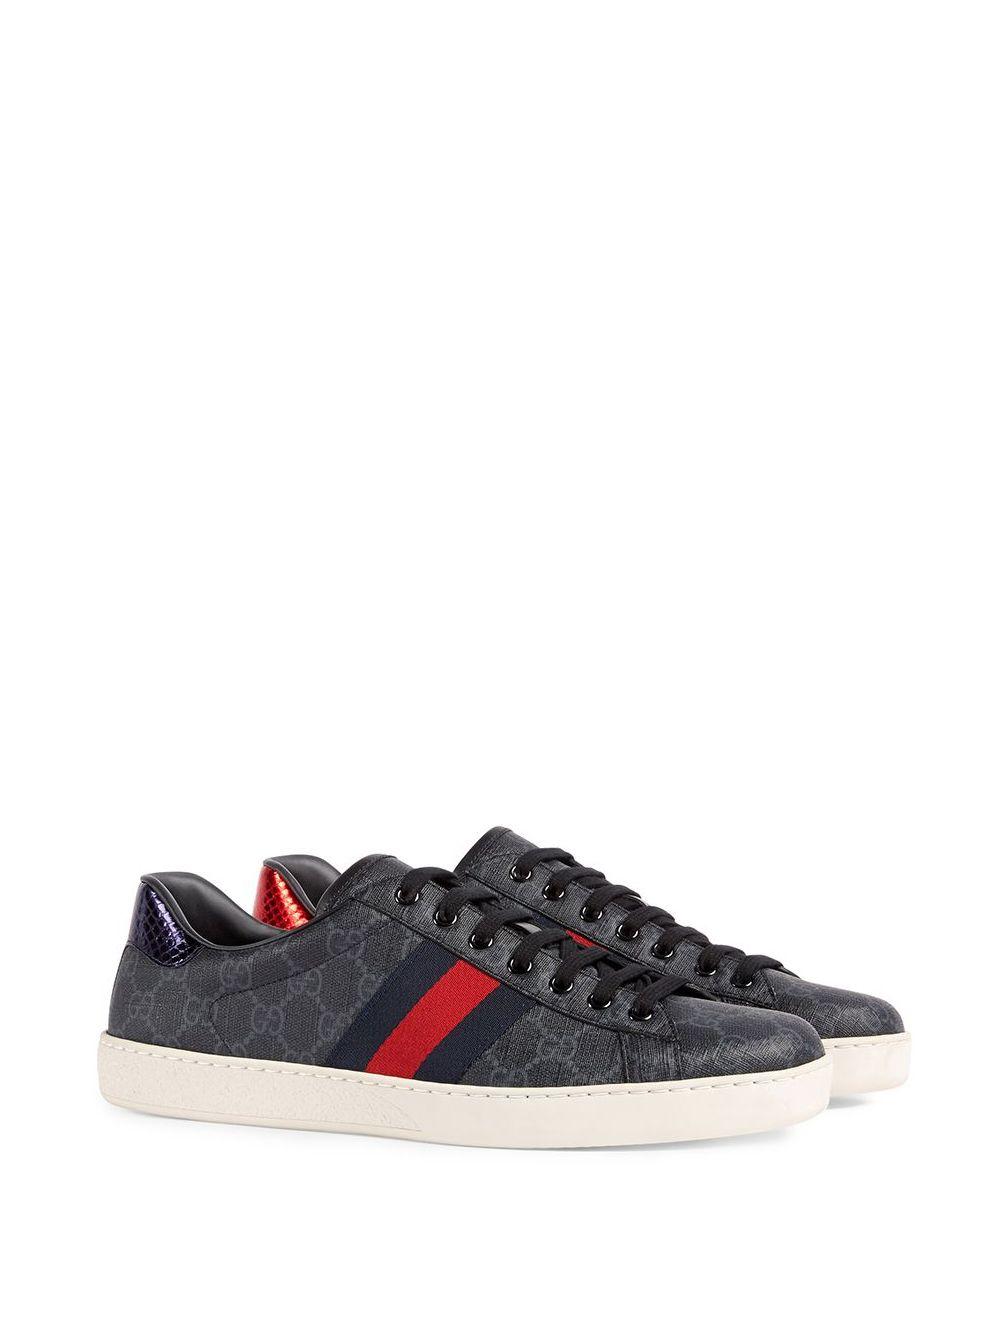 Gucci Leather Ace Gg Supreme Low-top Sneakers in Black for Men - Lyst